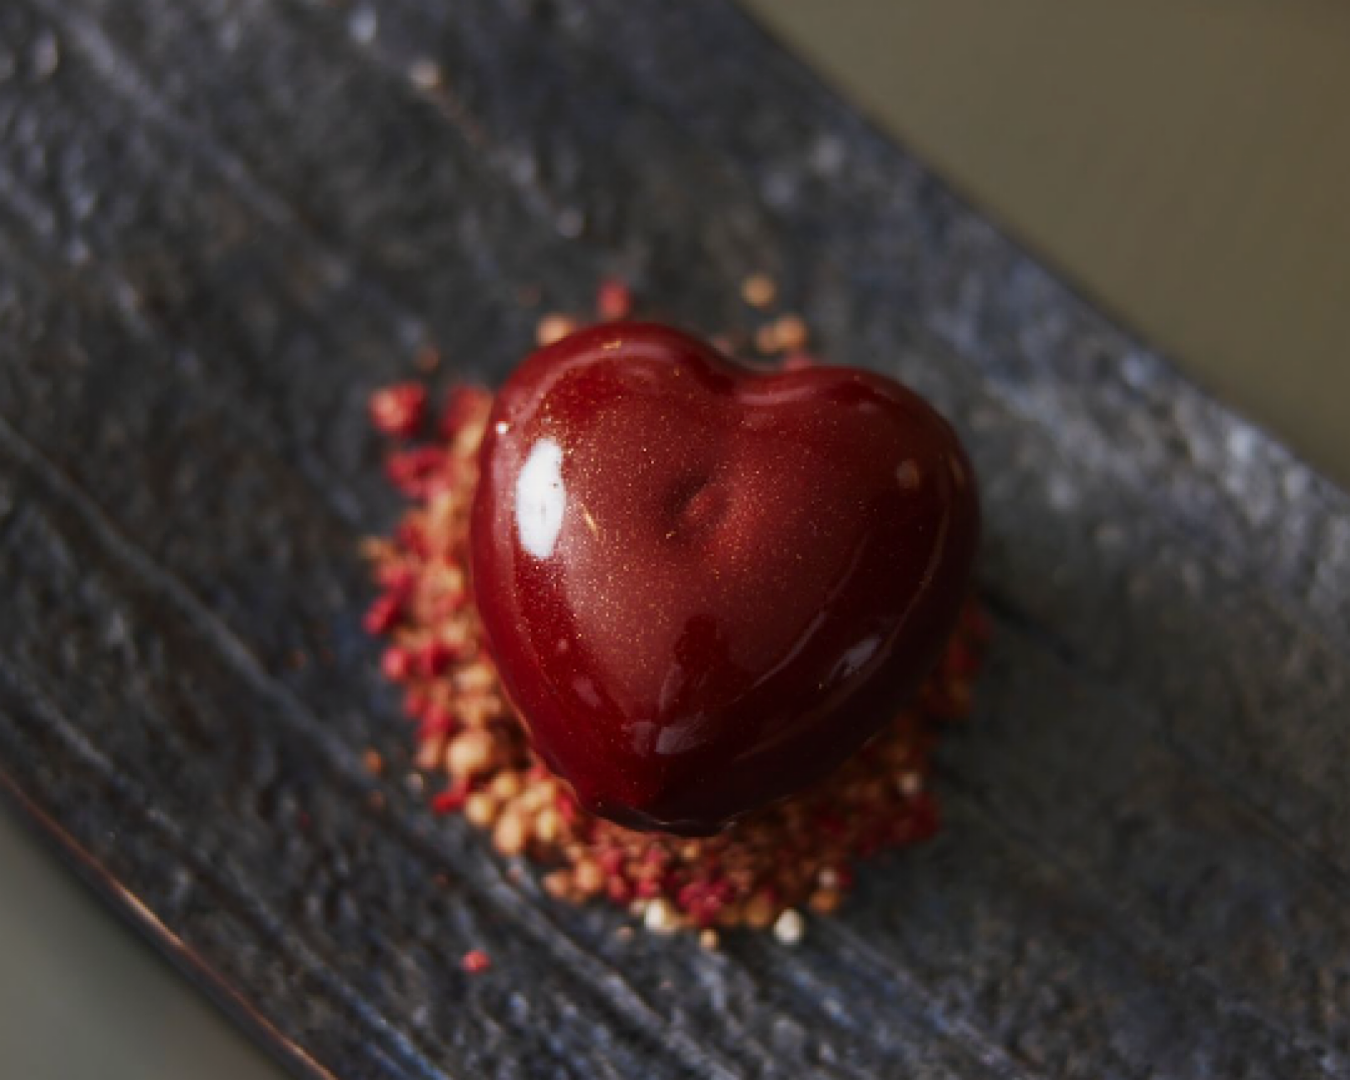 A gorgeous red heart-shaped desert from JW Kitchen, one of the best places to dine in Auckland this Valentine’s Day.